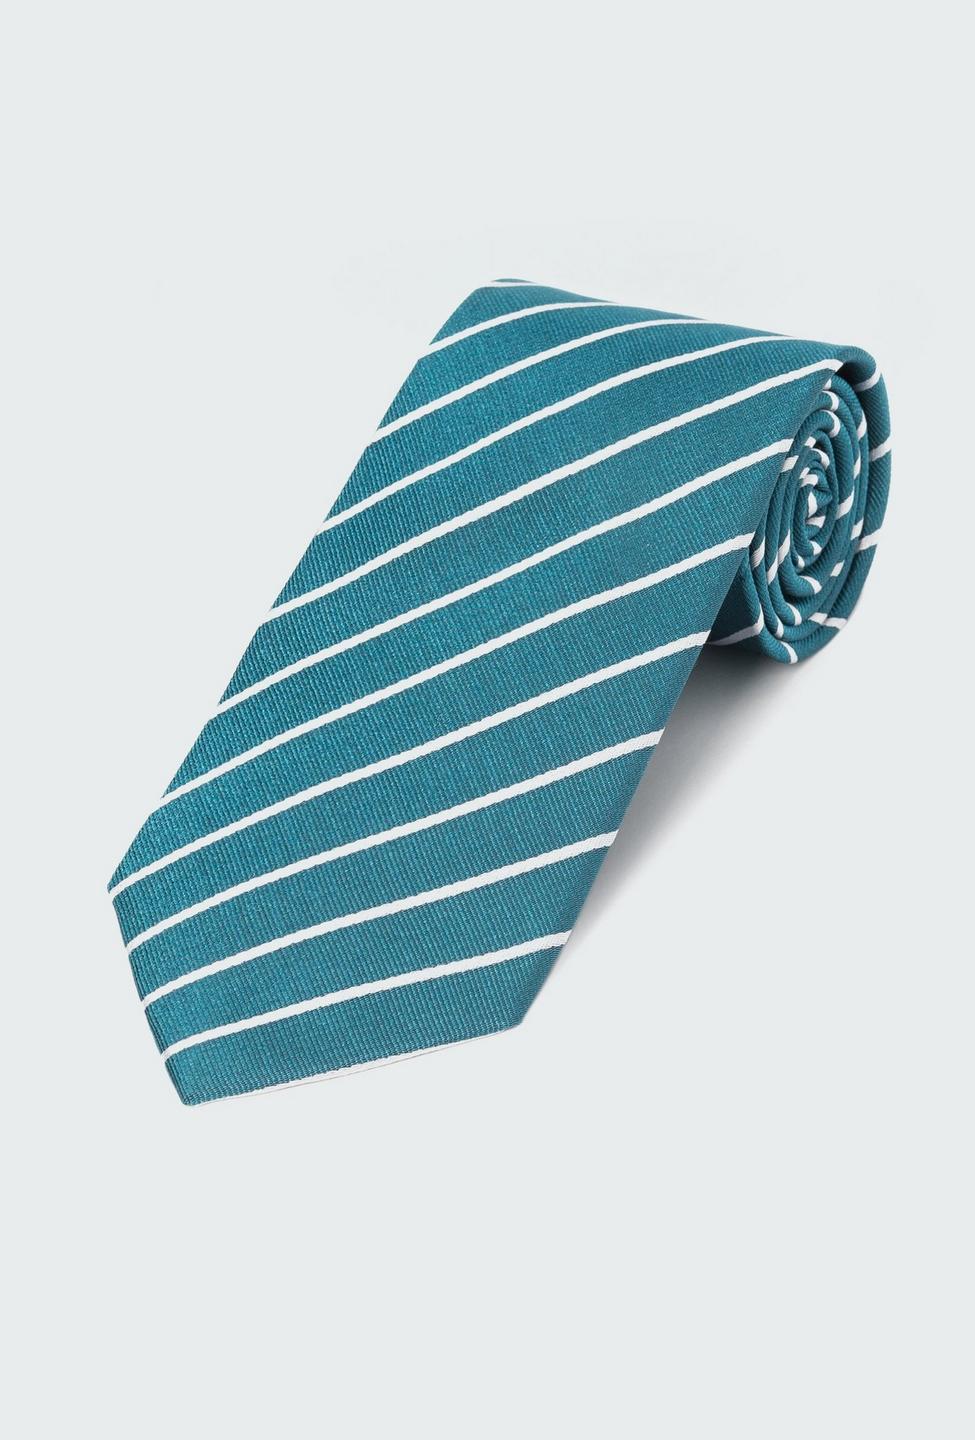 Blue and Green tie - Striped Design from Indochino Collection